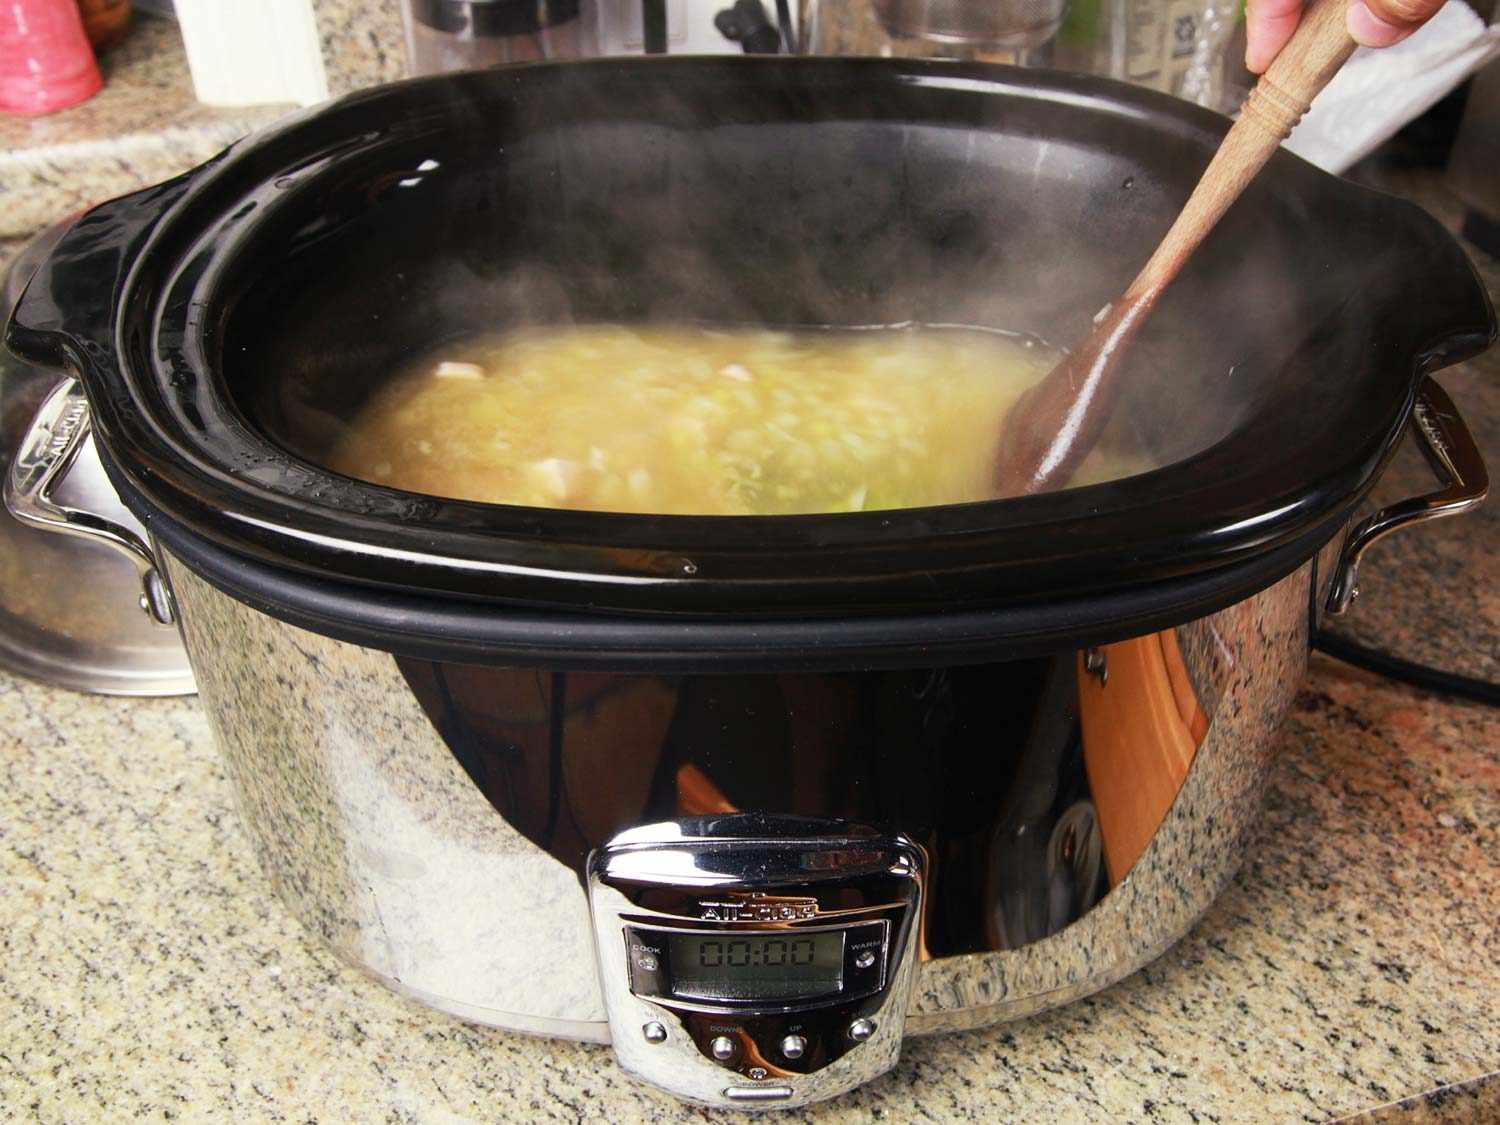 How To Store Crock Pot Leftovers